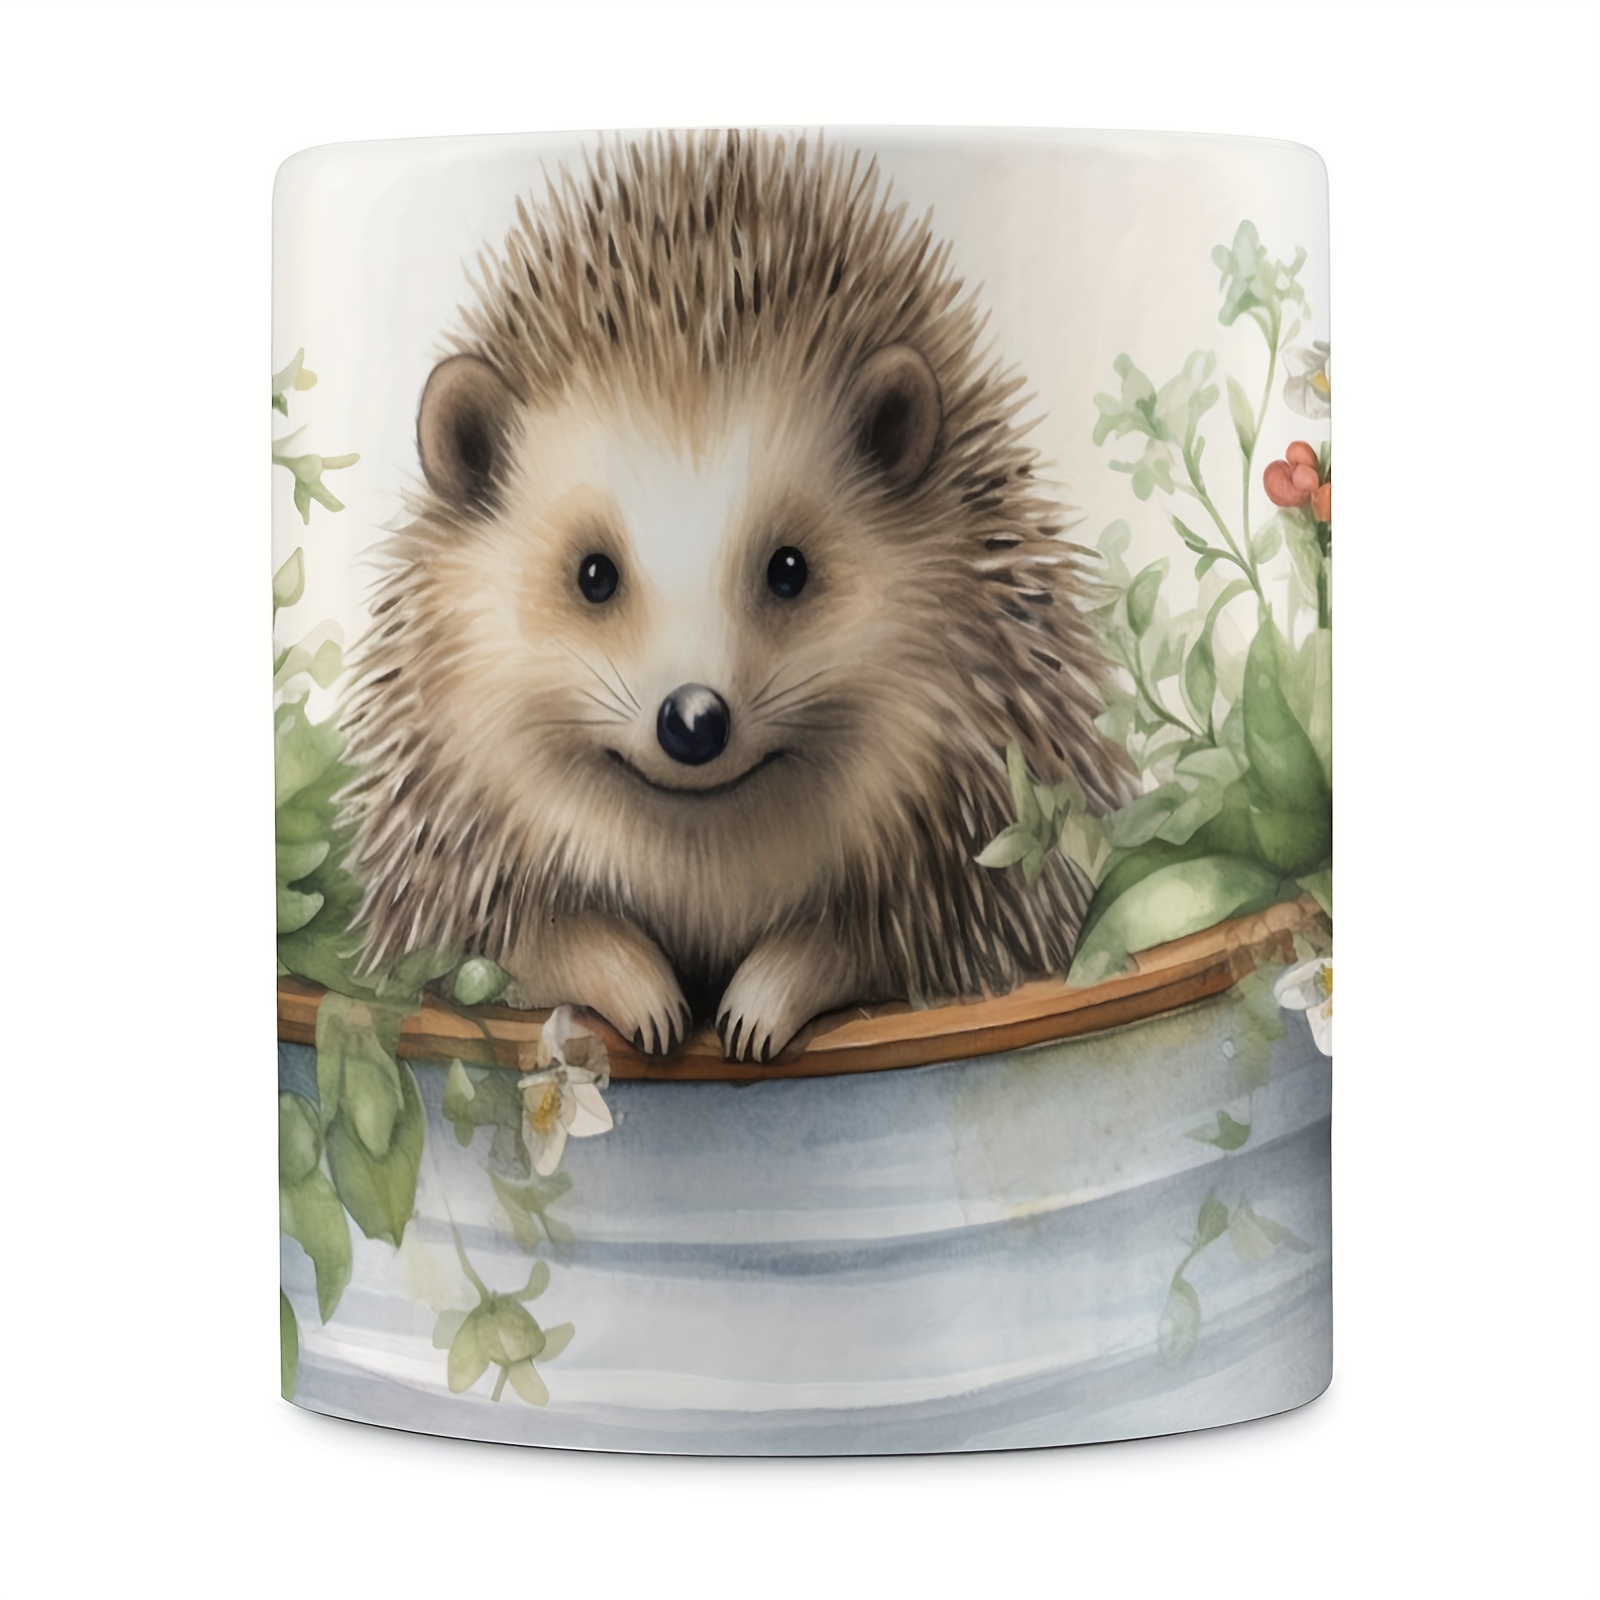 

1pc, 11oz/330ml Coffee Mug, Color Paintings Of Hedgehogs, Ideal Gift For Friends, Sisters, Colleagues, And Family - Perfect For Coffee Lovers - Ceramic Cup For Birthdays, Parties, And Holidays